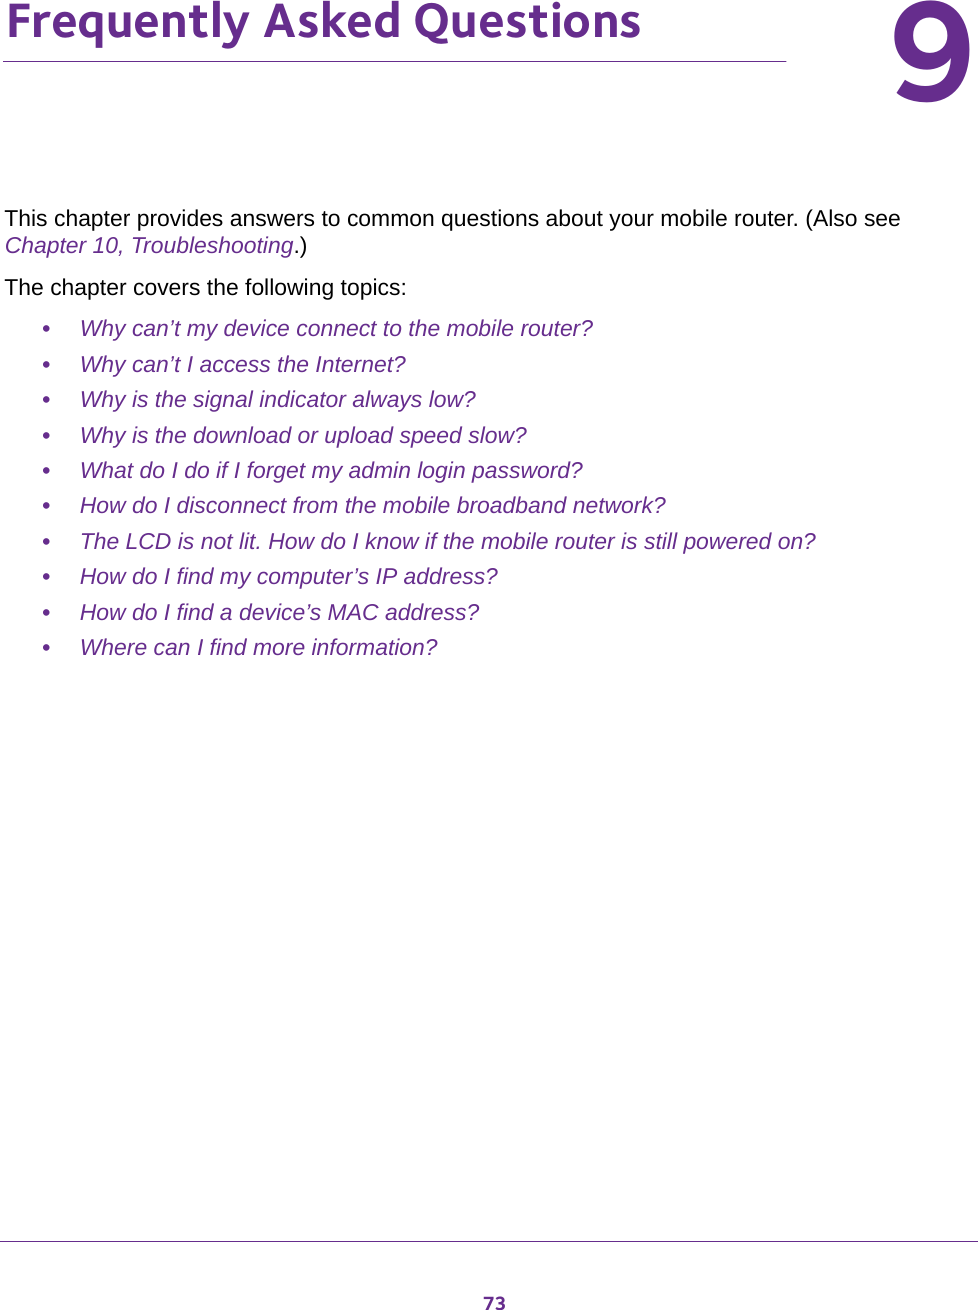 7399.   Frequently Asked QuestionsThis chapter provides answers to common questions about your mobile router. (Also see Chapter 10, Troubleshooting.) The chapter covers the following topics:•Why can’t my device connect to the mobile router?•Why can’t I access the Internet?•Why is the signal indicator always low?•Why is the download or upload speed slow?•What do I do if I forget my admin login password?•How do I disconnect from the mobile broadband network?•The LCD is not lit. How do I know if the mobile router is still powered on?•How do I find my computer’s IP address?•How do I find a device’s MAC address?•Where can I find more information?